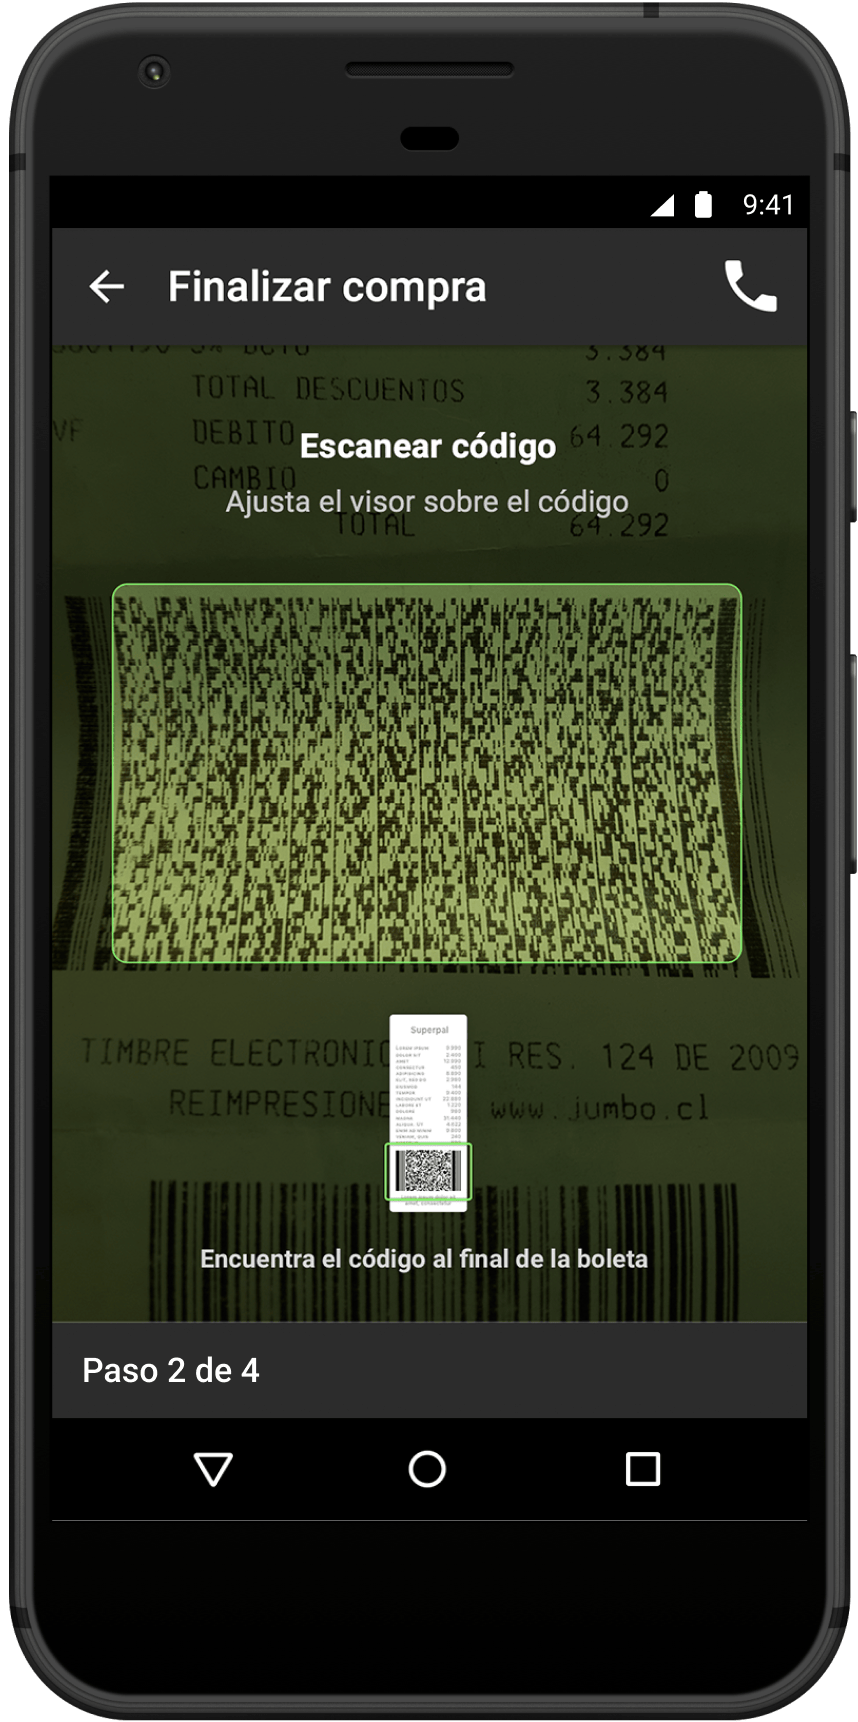 Google Pixel displaying an app for picking groceries. It shows a barcode scanner that is using the device's camera, currently detecting a barcode framed on a green rectangle.